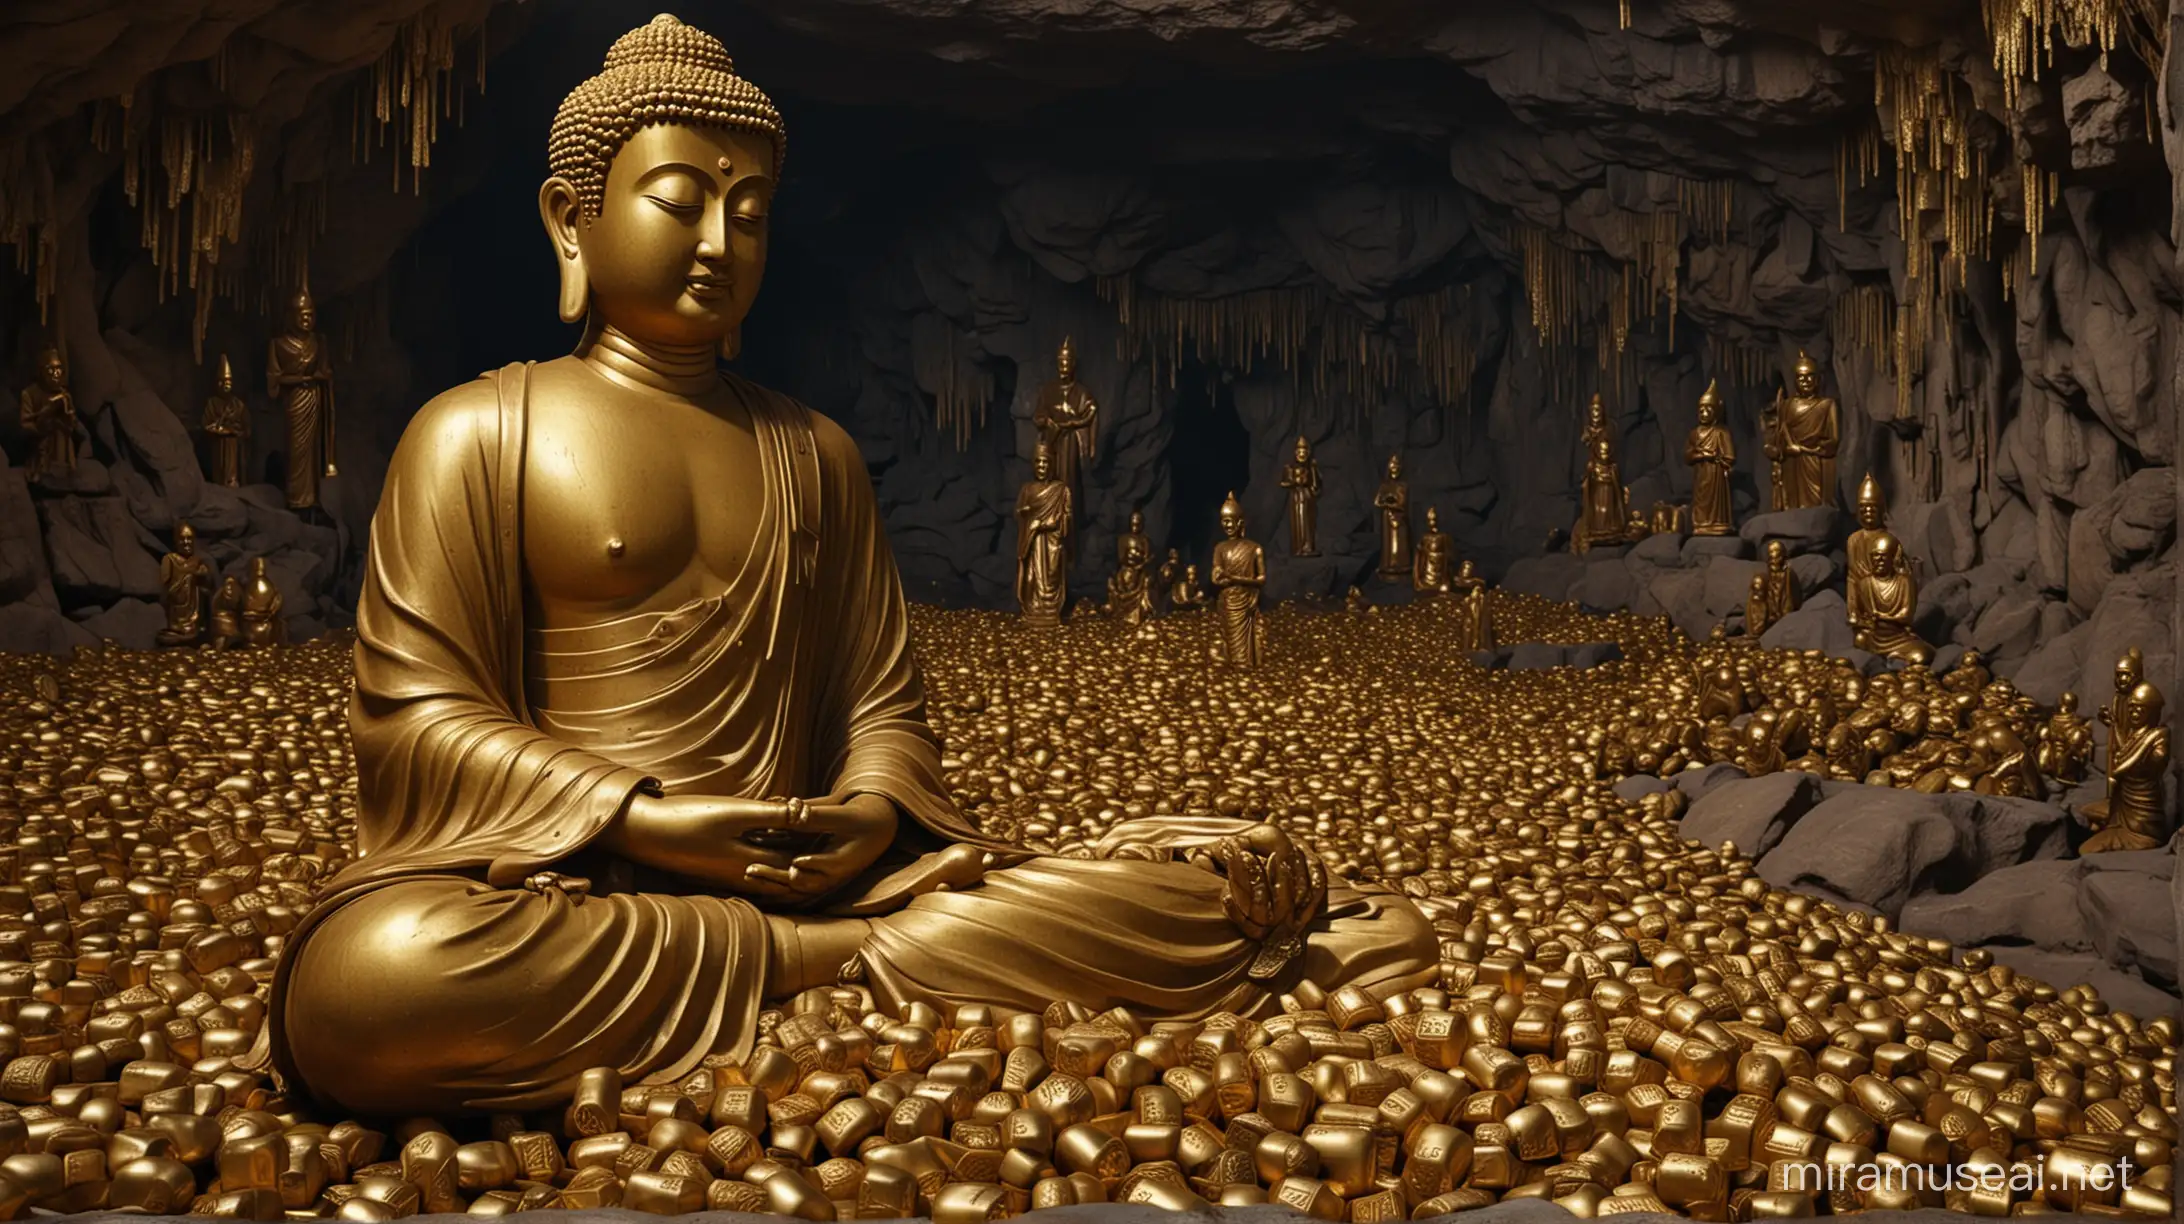 A life-sized golden buddha statue surrounded by a multitude of gold bars piled together in a dark and dangerous tropical cave, on the ground of the cave are dead treasure hunters and skeletons wearing World War II Japanese soldier uniforms, cinematic